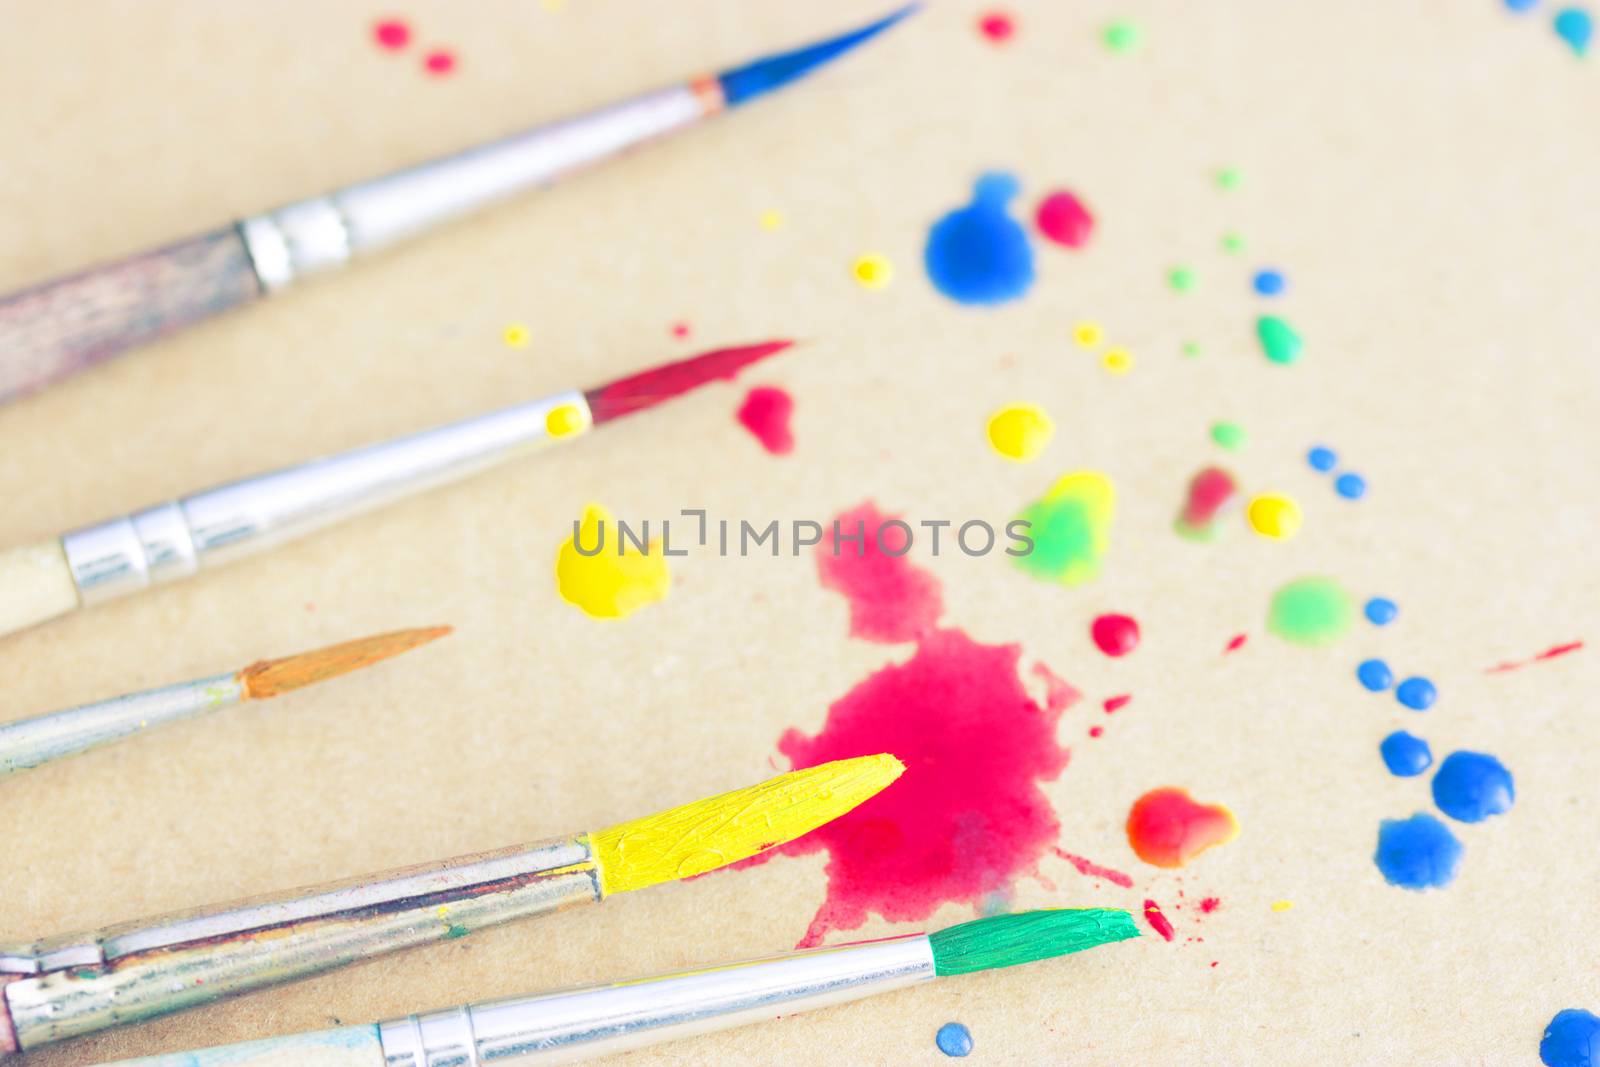 Row of artist paintbrushes closeup by liwei12